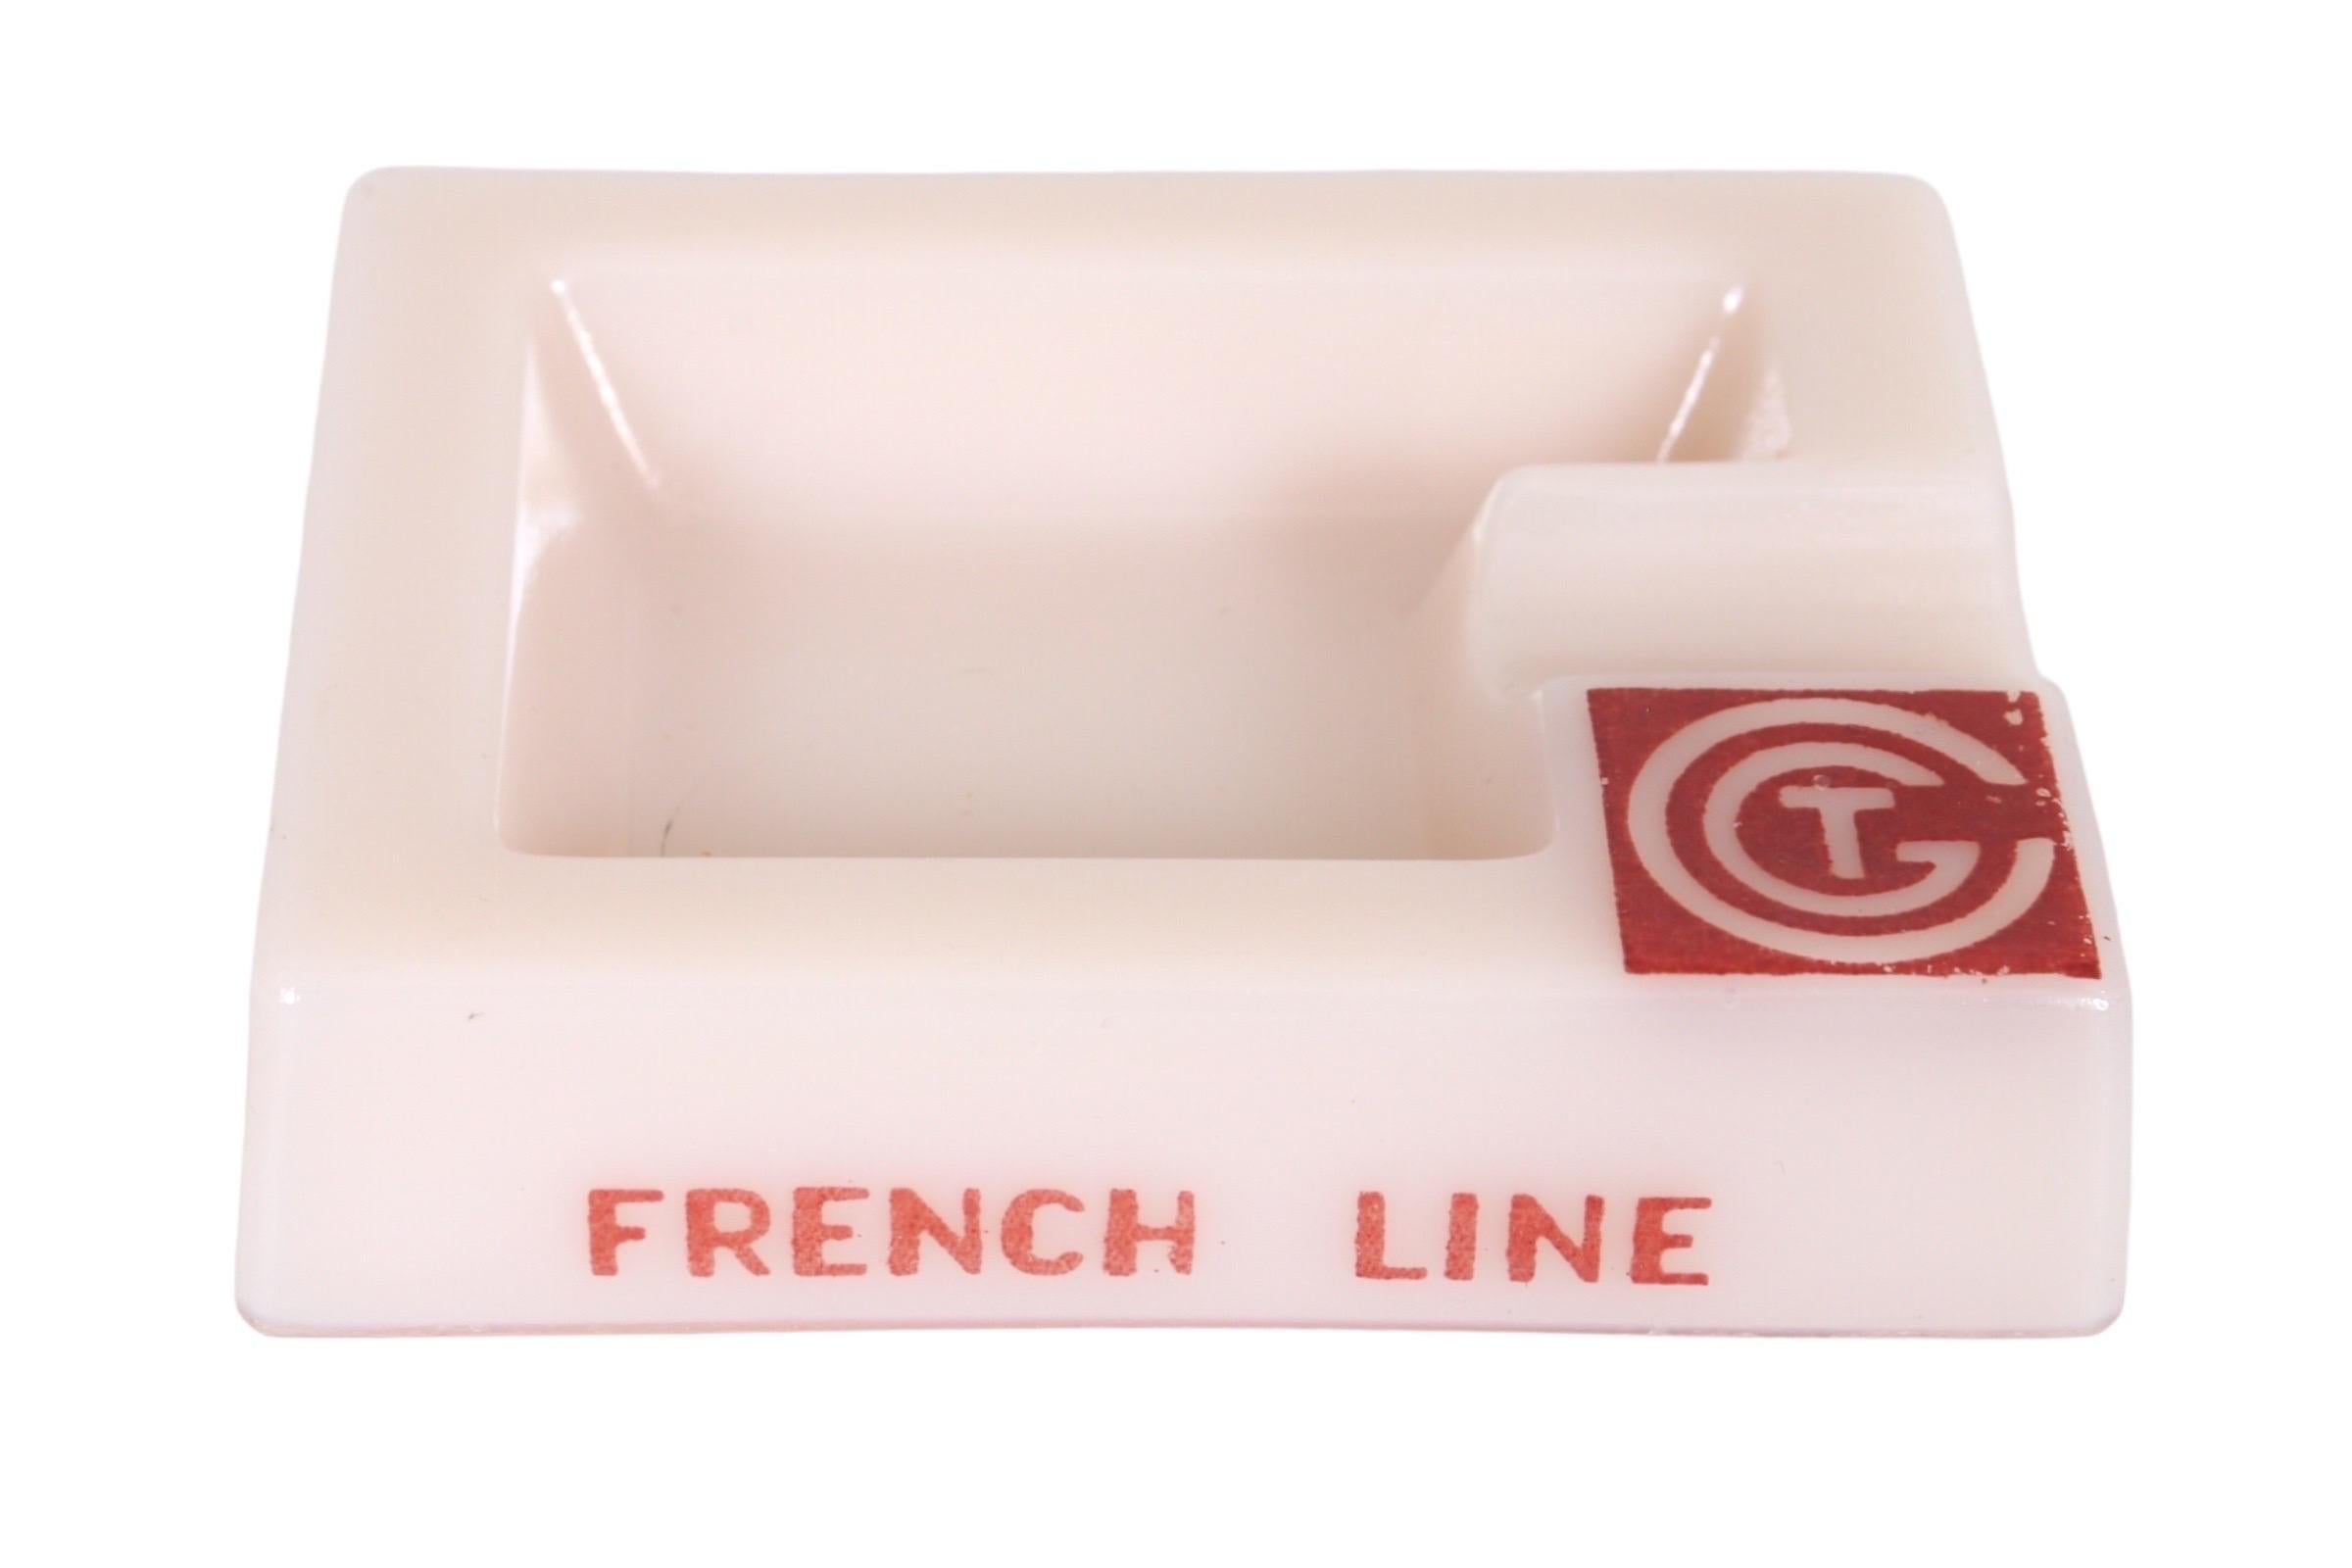 ashtray in french